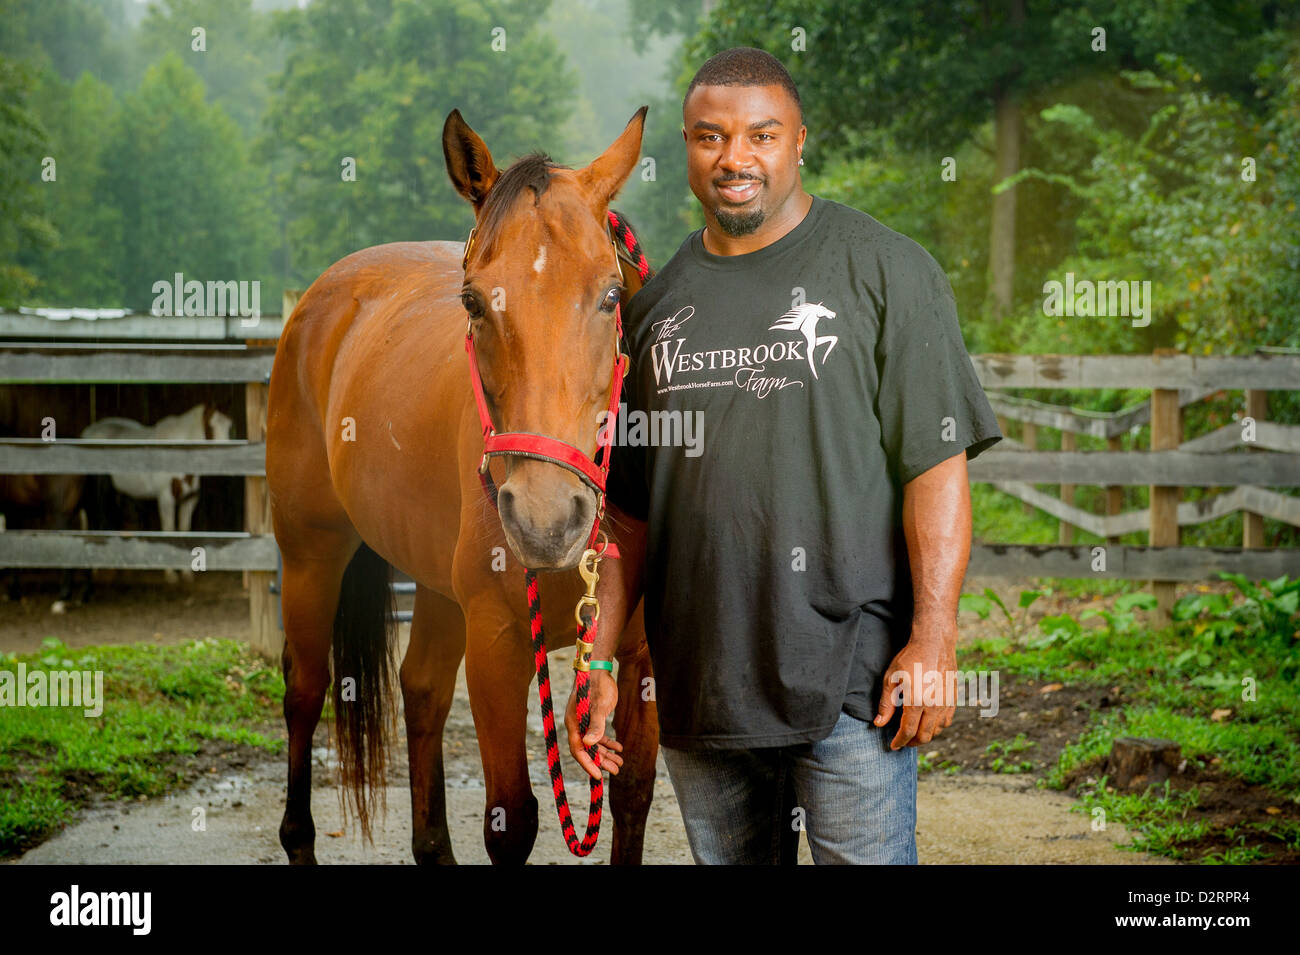 Brian Westbrook, former NFL Player and horse owner with horse in stable  Stock Photo